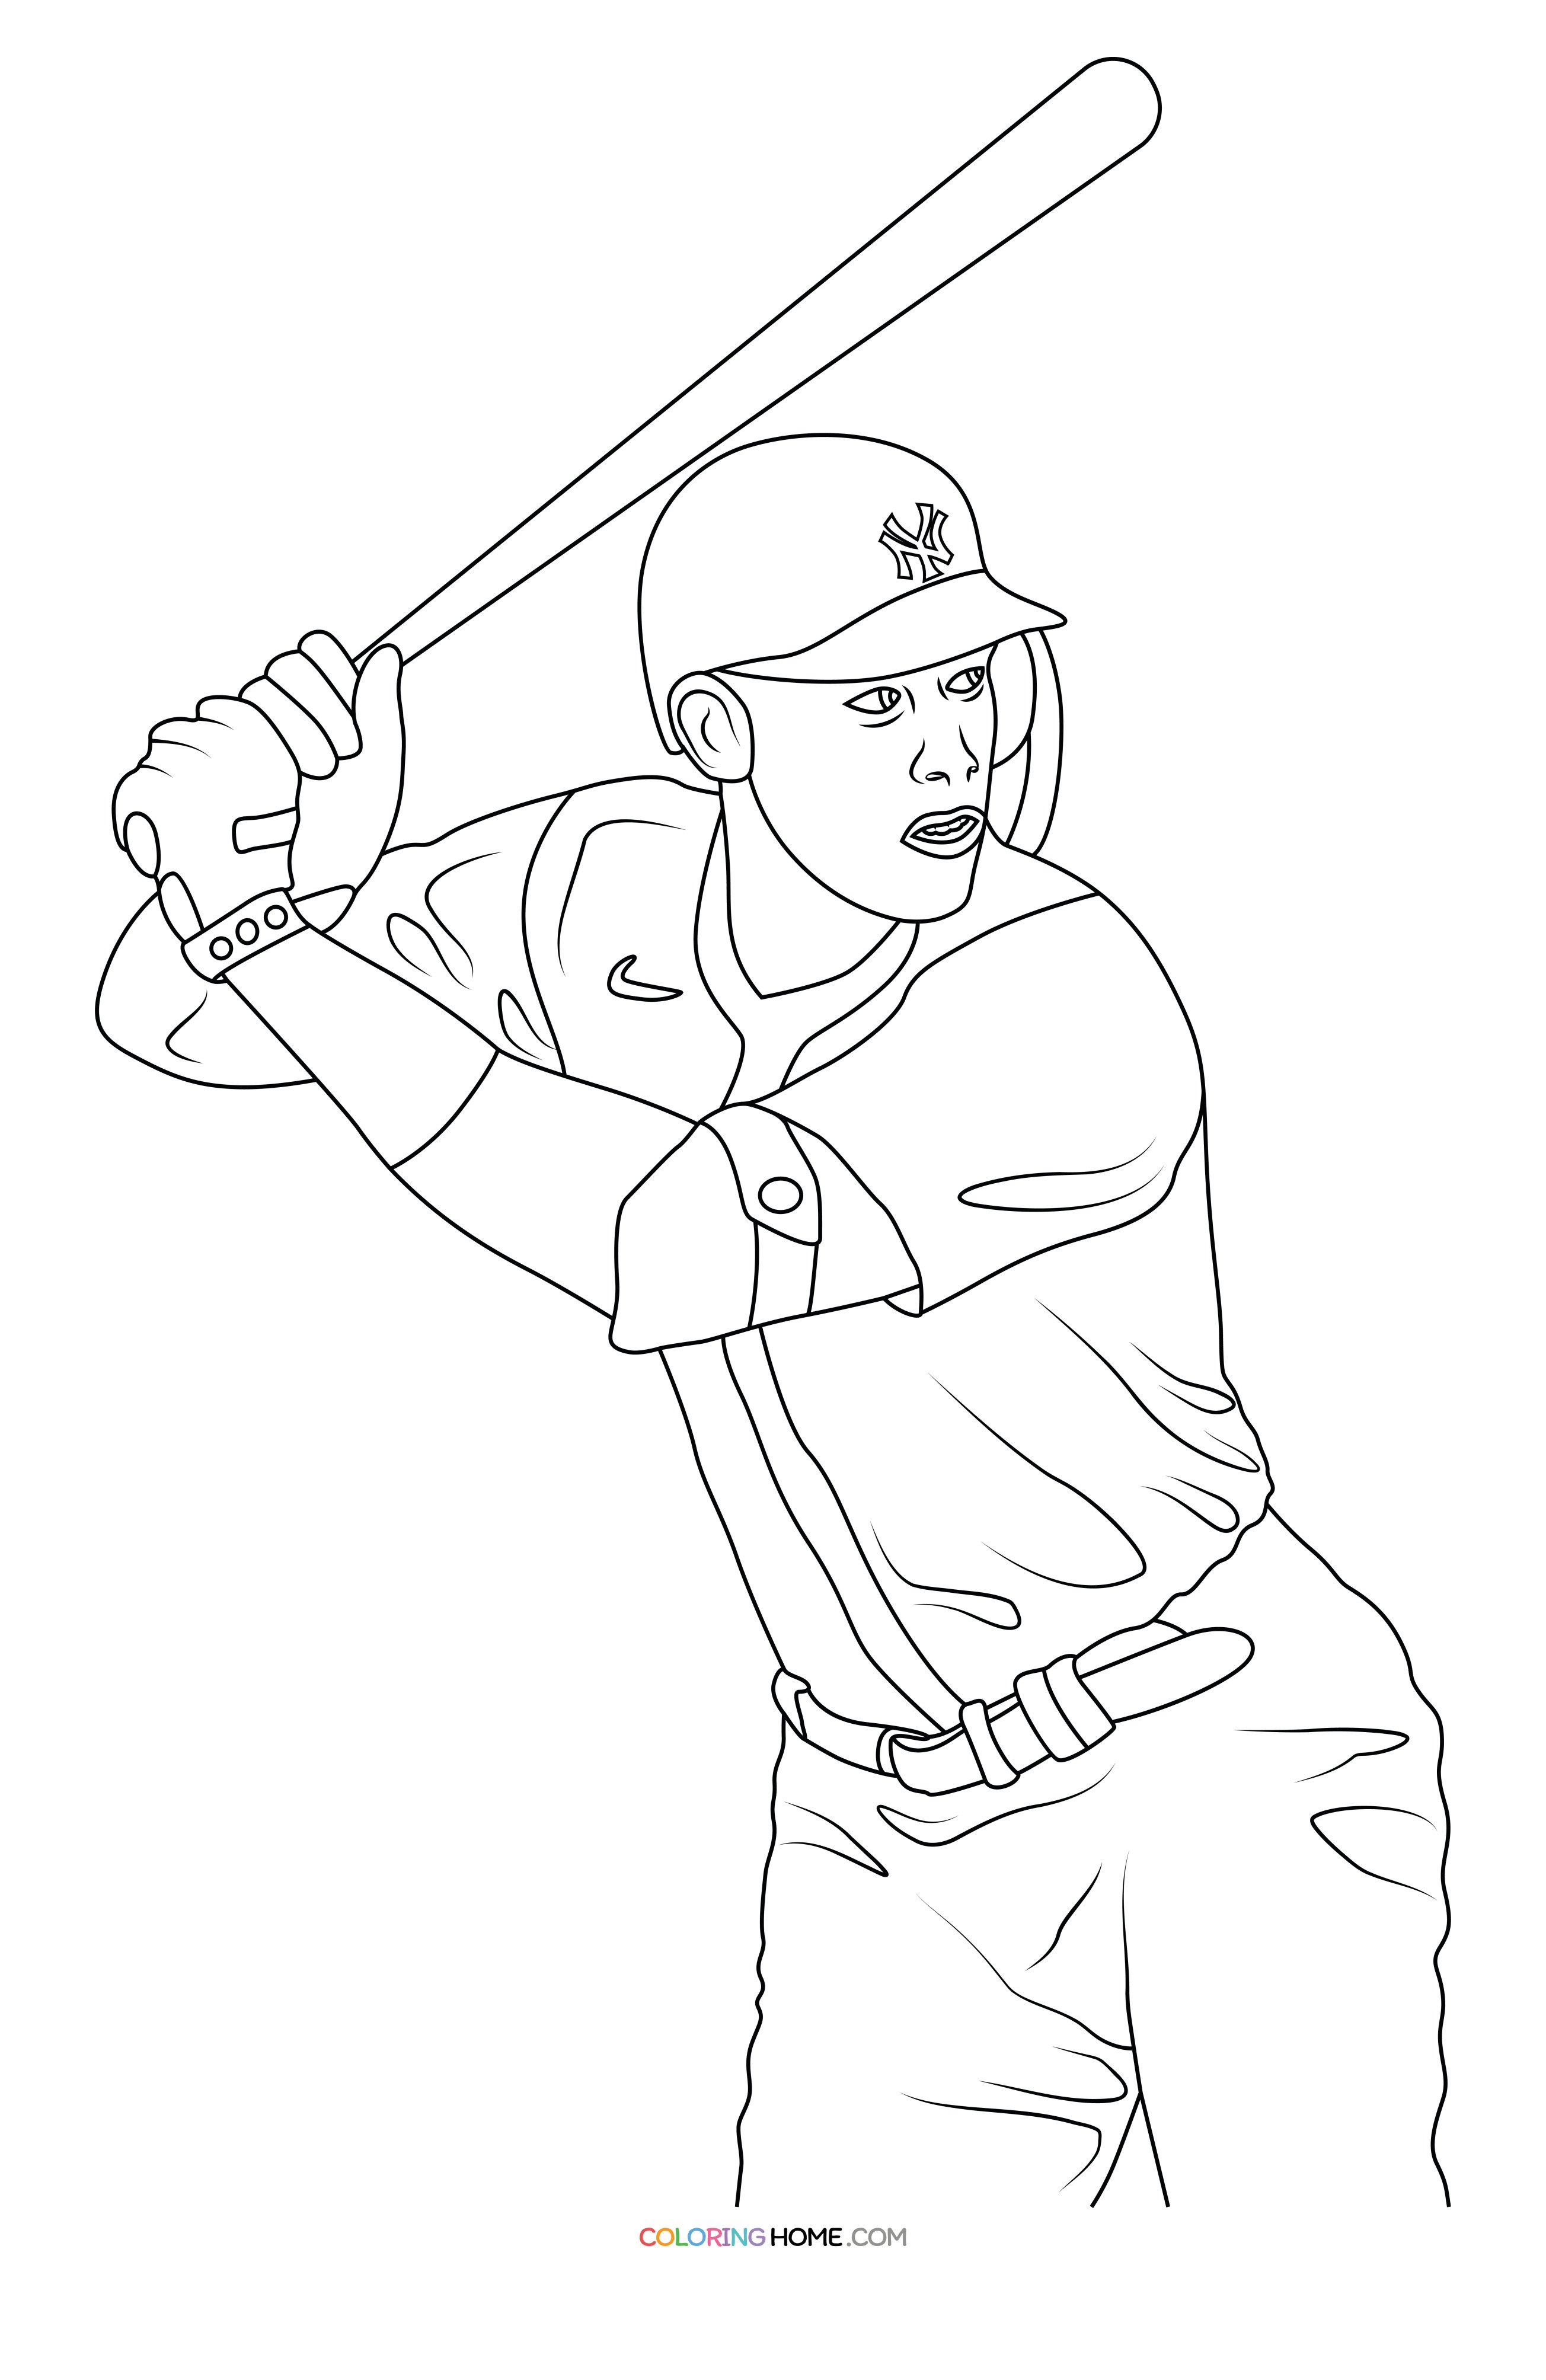 Aaron Judge Coloring Page - Coloring Home